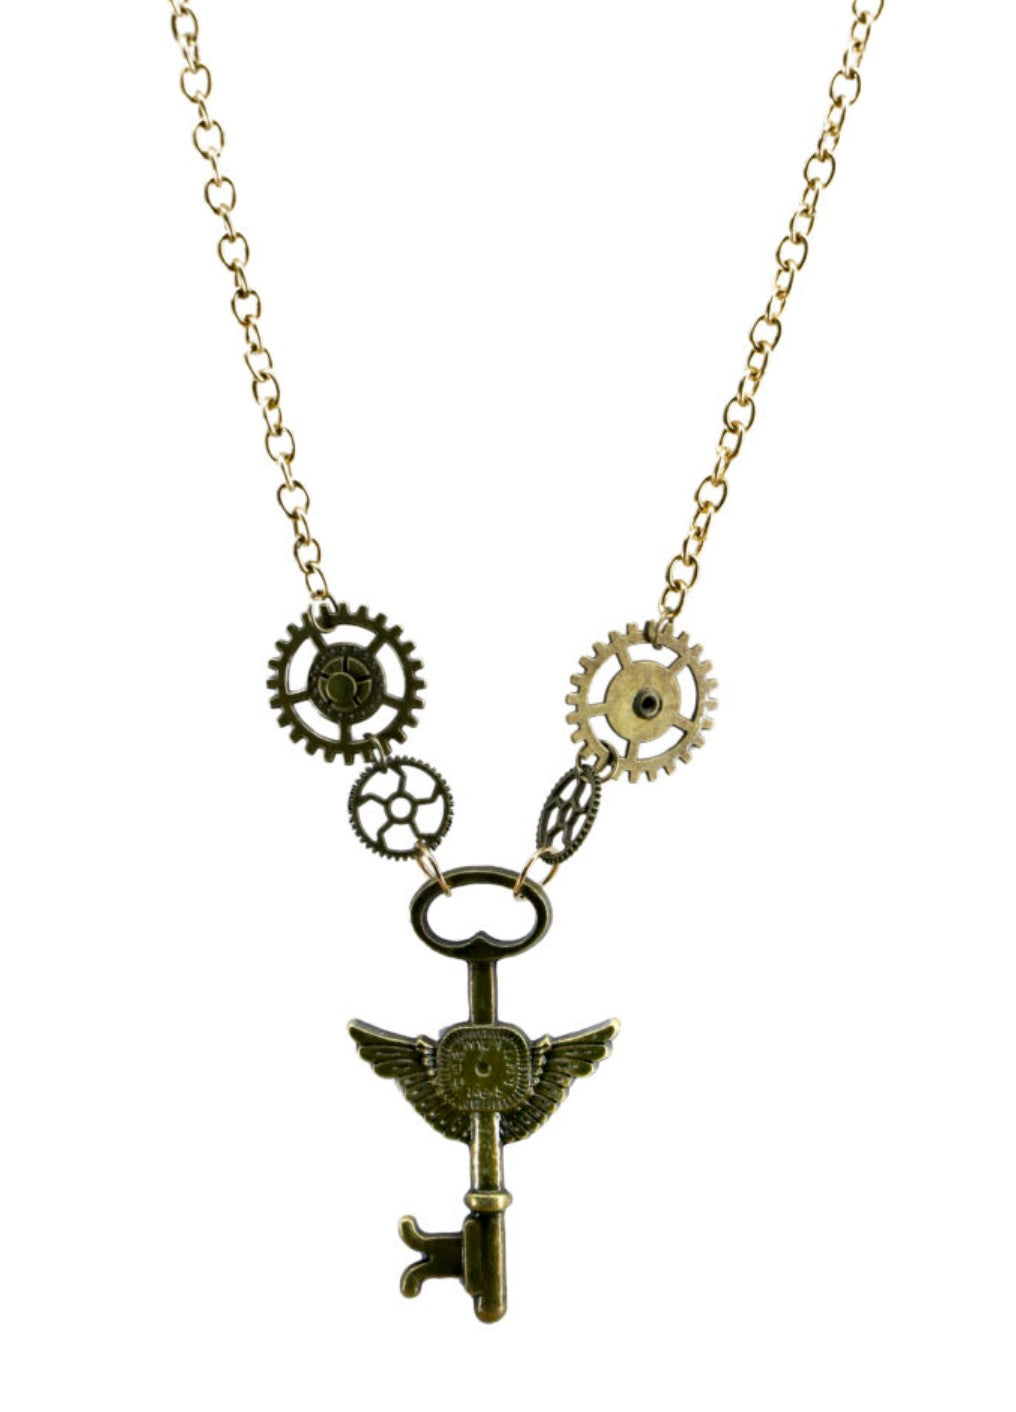 Steampunk gears and key necklace